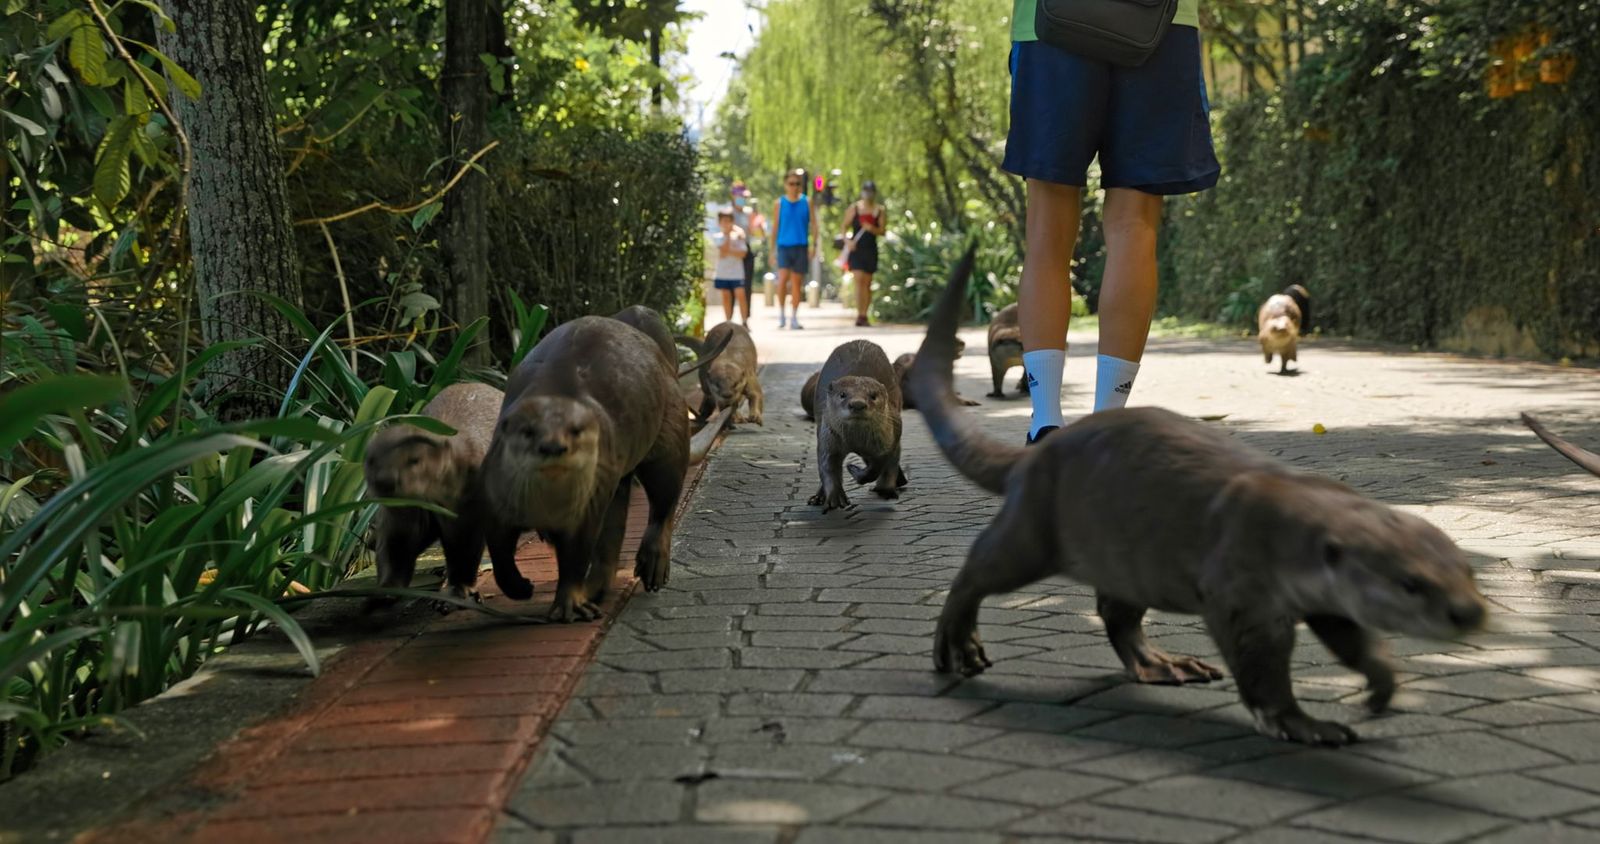 New BBC Earth documentary features S’pore otters, producer says filming them like watching otter soap opera